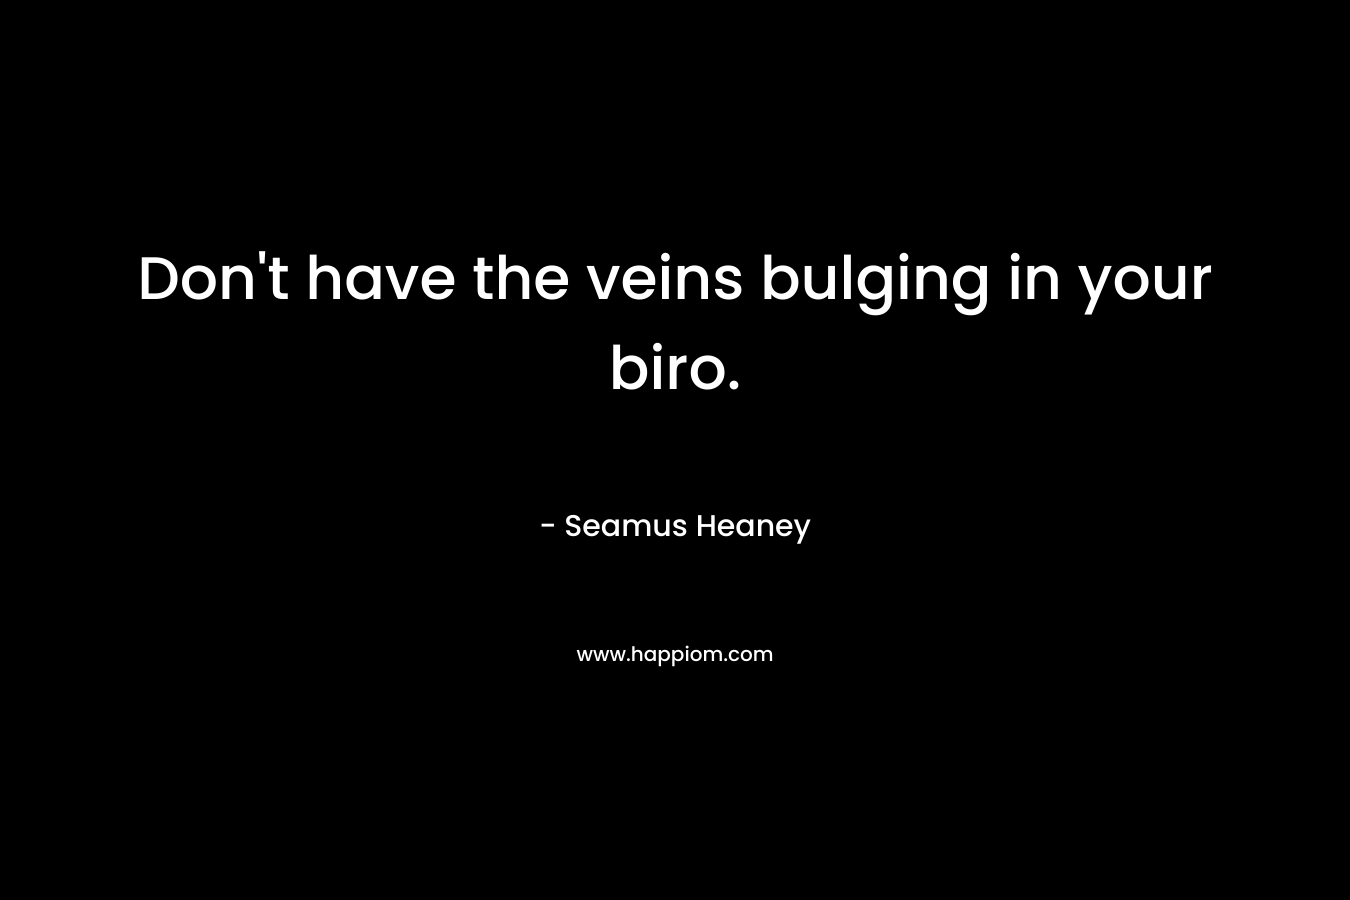 Don’t have the veins bulging in your biro. – Seamus Heaney